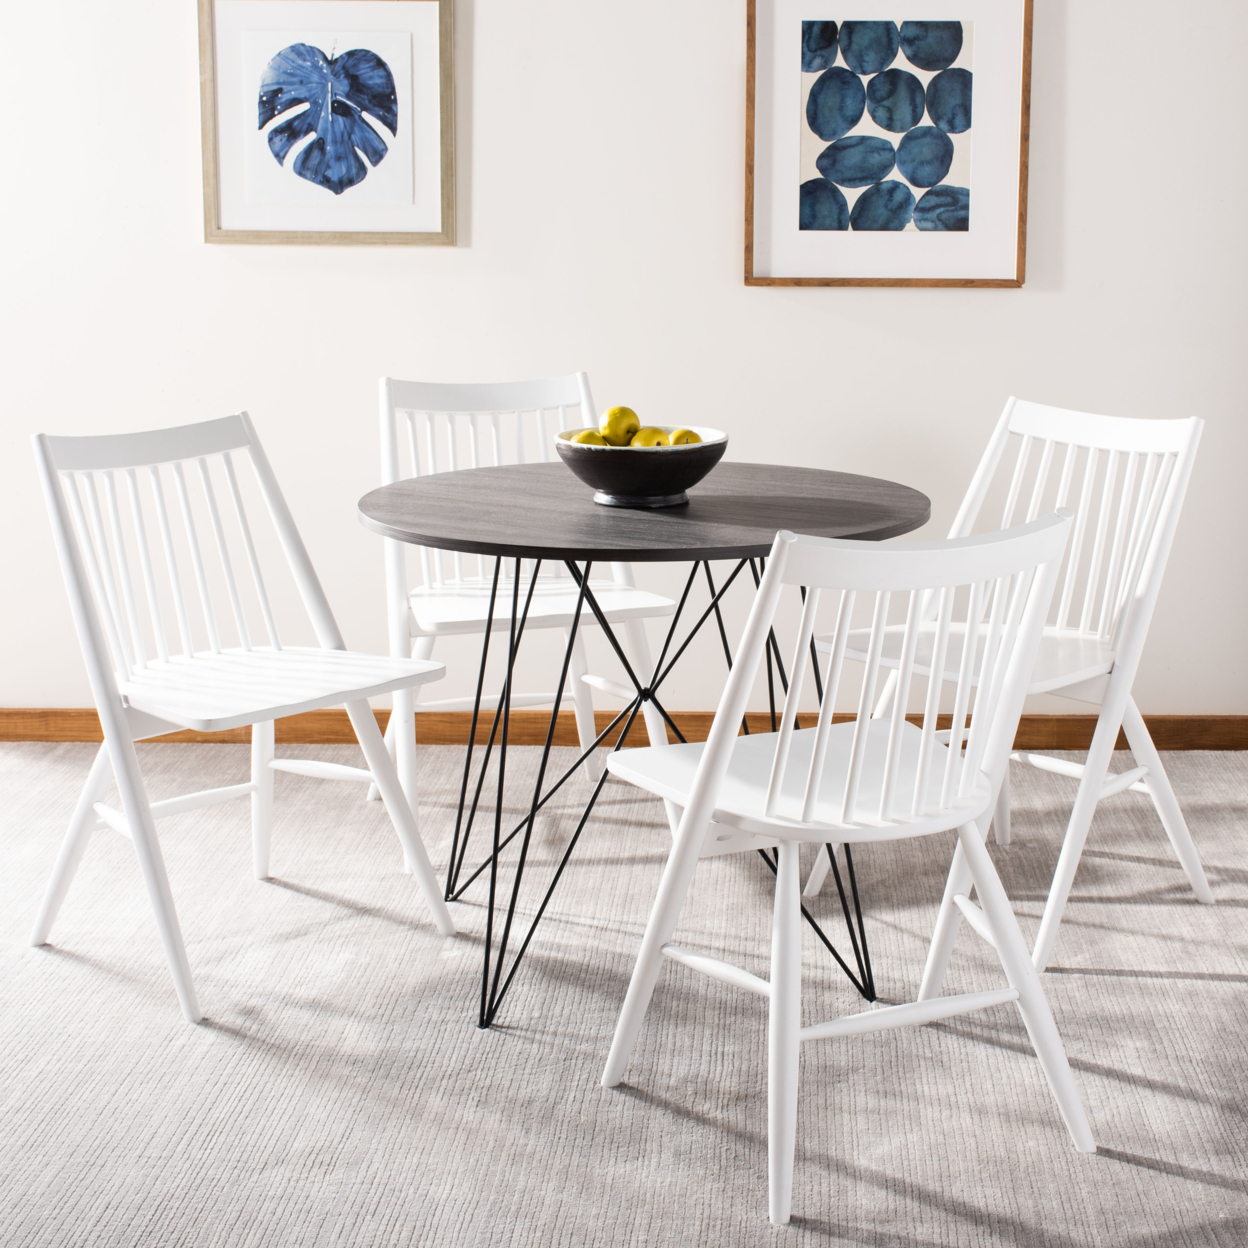 SAFAVIEH Wren 19H Spindle Dining Chair Set Of 2 White